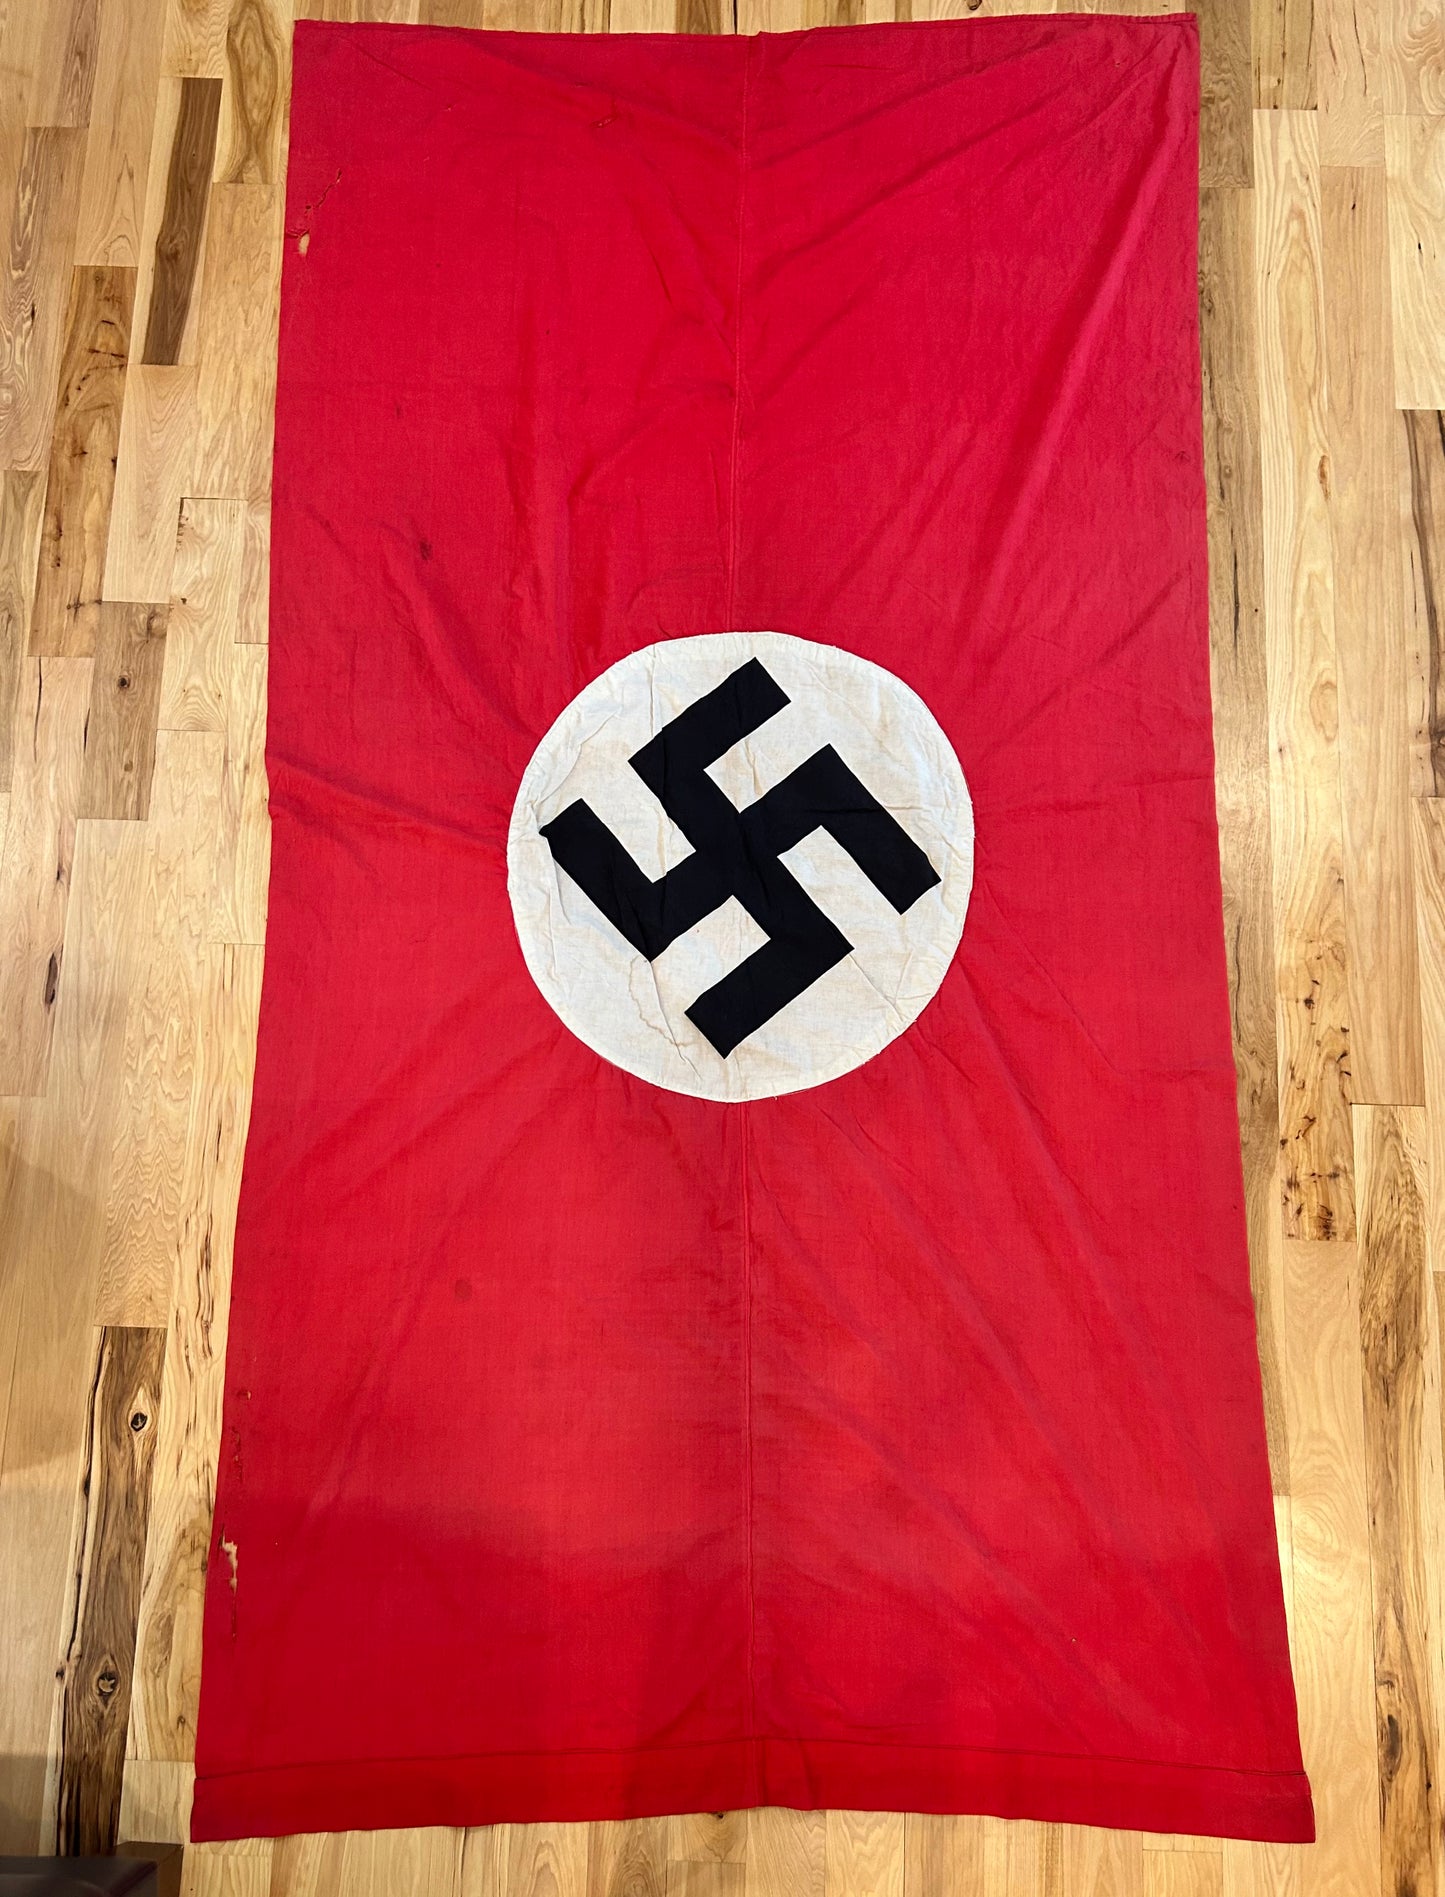 Massive 9x5 Ft NSDAP flag with slight condition issues